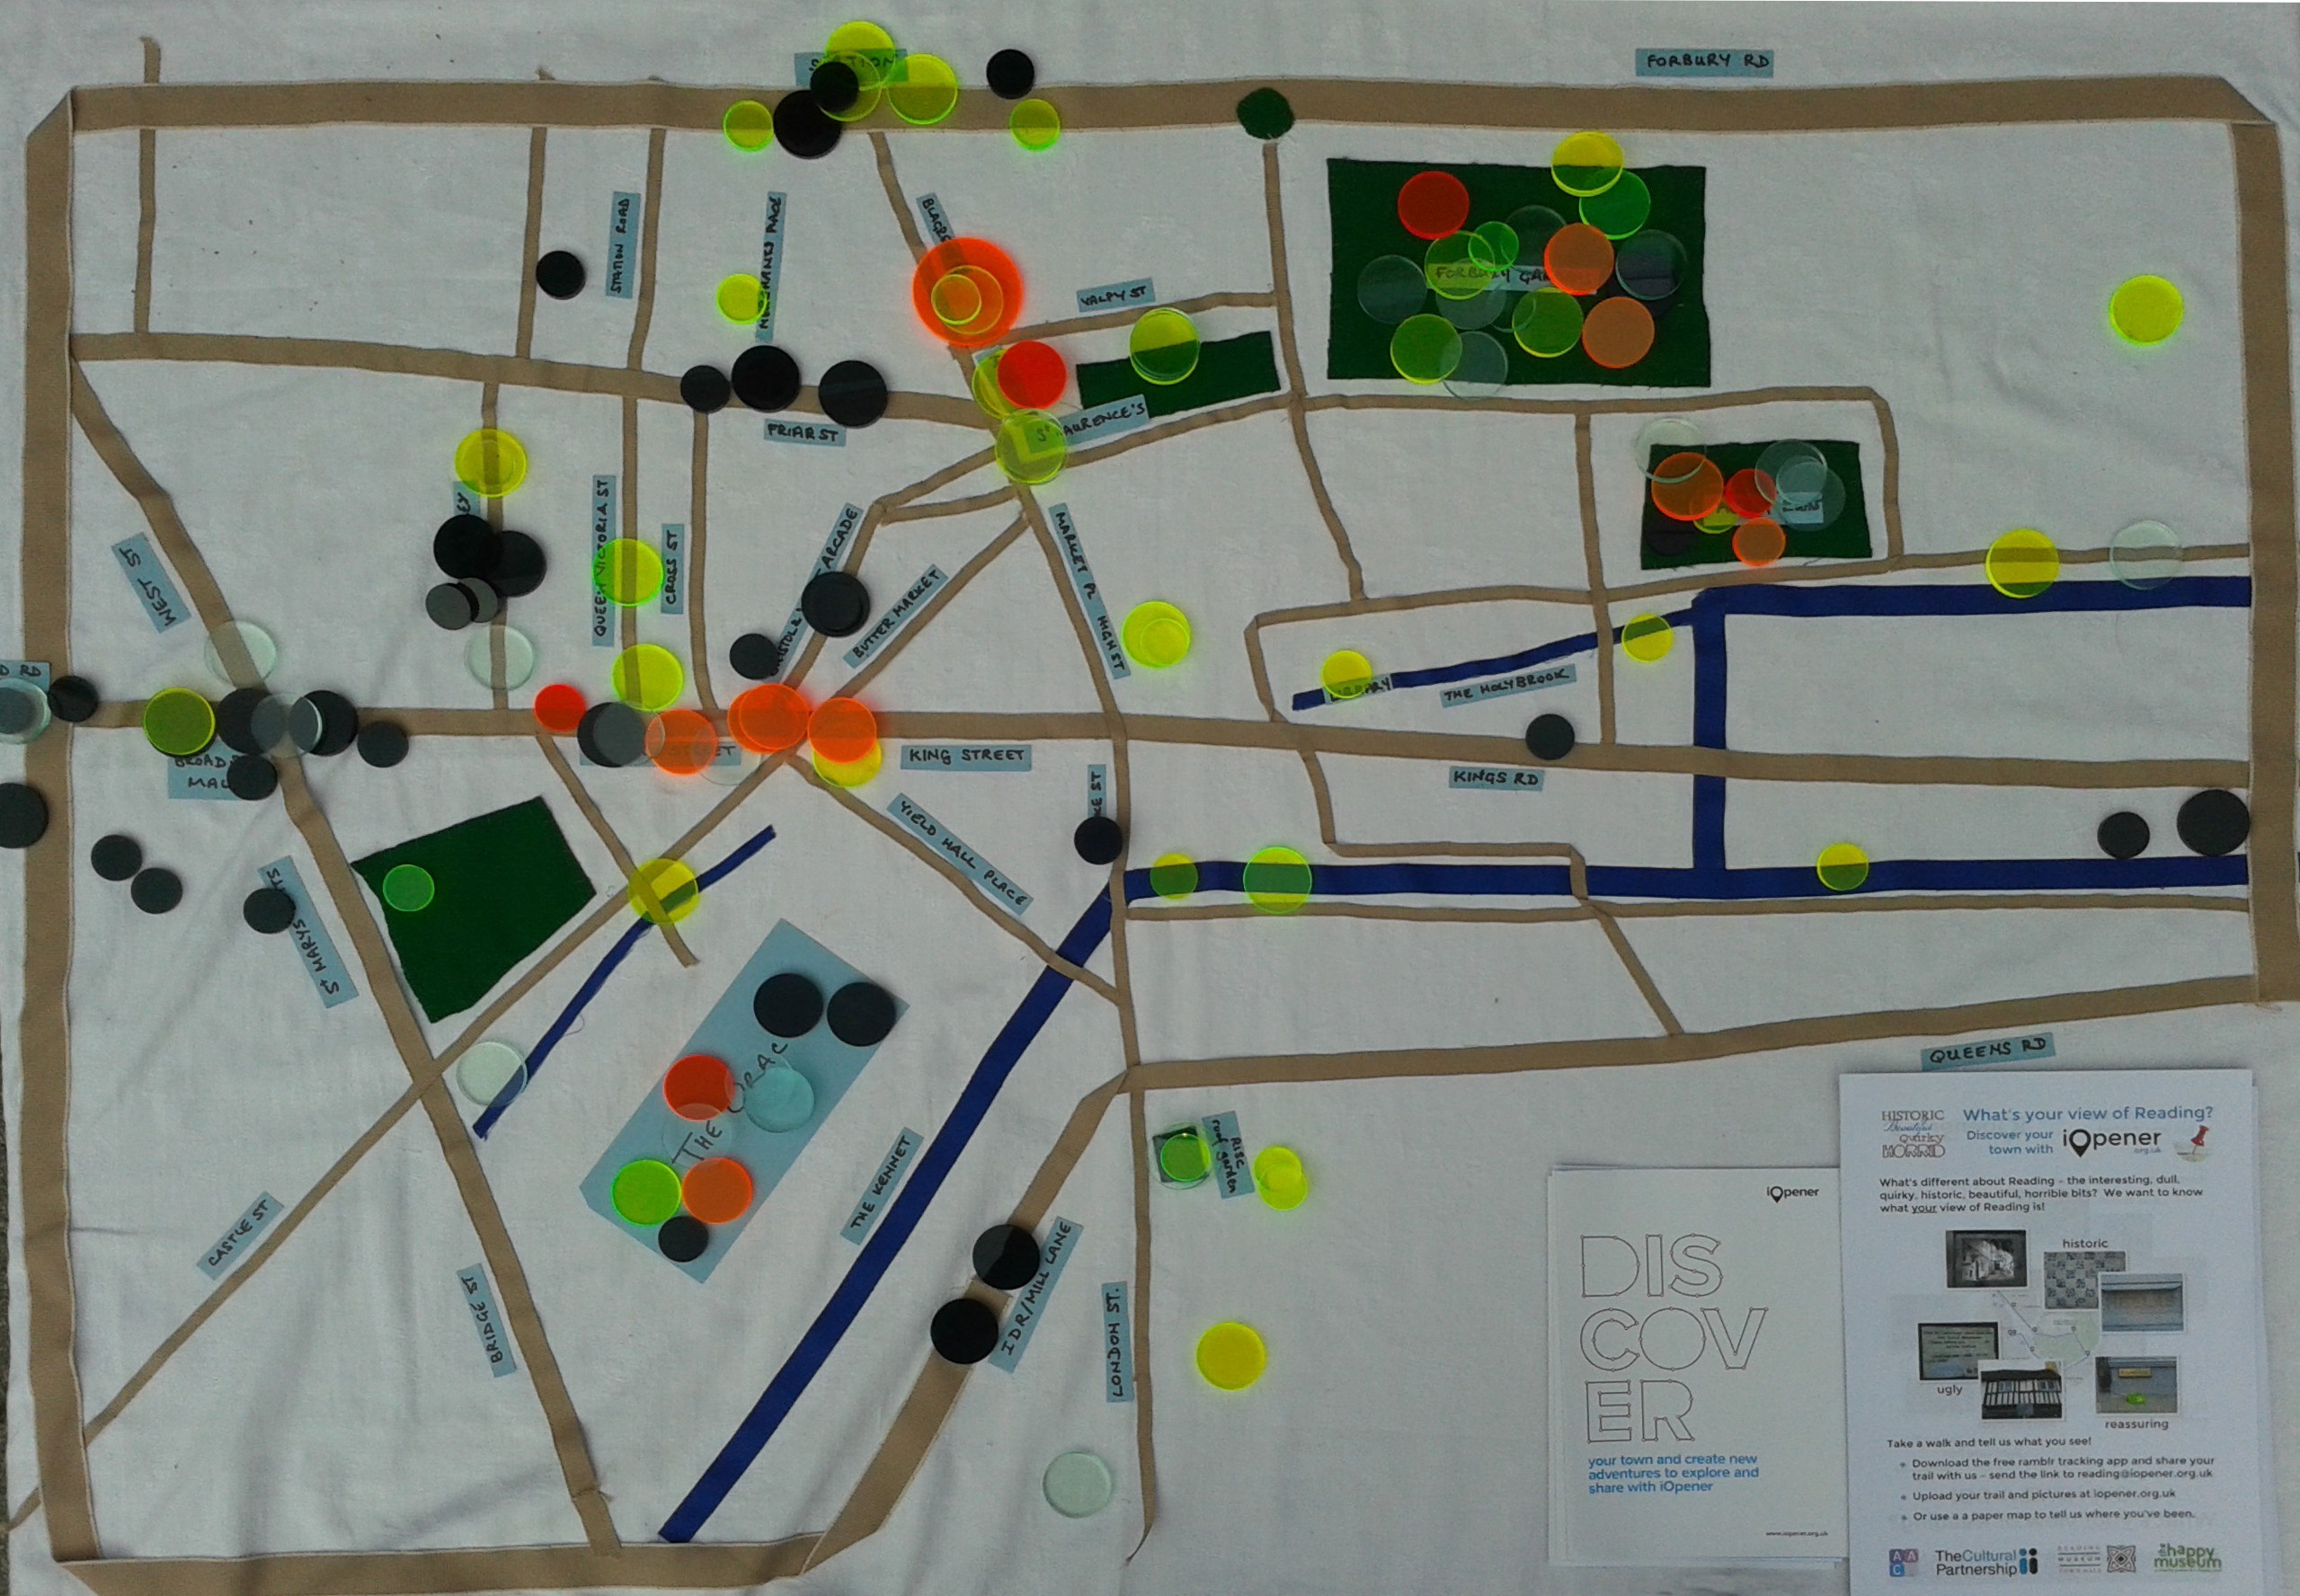 Simple table cloth map of central Reading showing good & bad trail points placed by participants 21/3/15